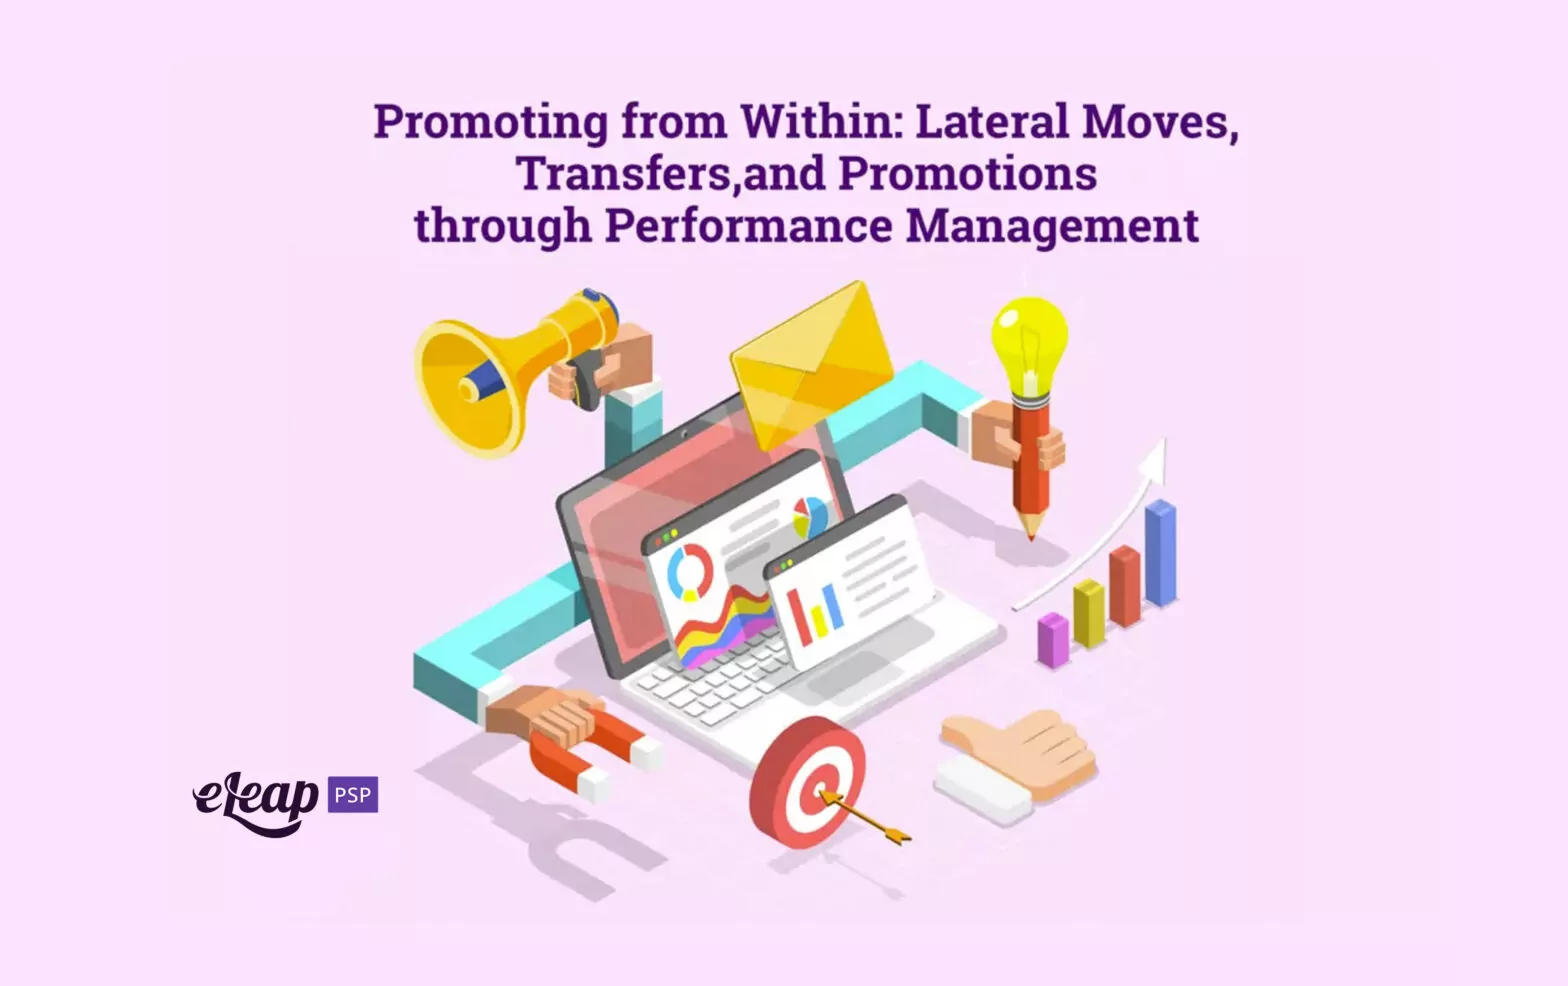 Promoting from Within: Lateral Moves, Transfers, and Promotions through Performance Management